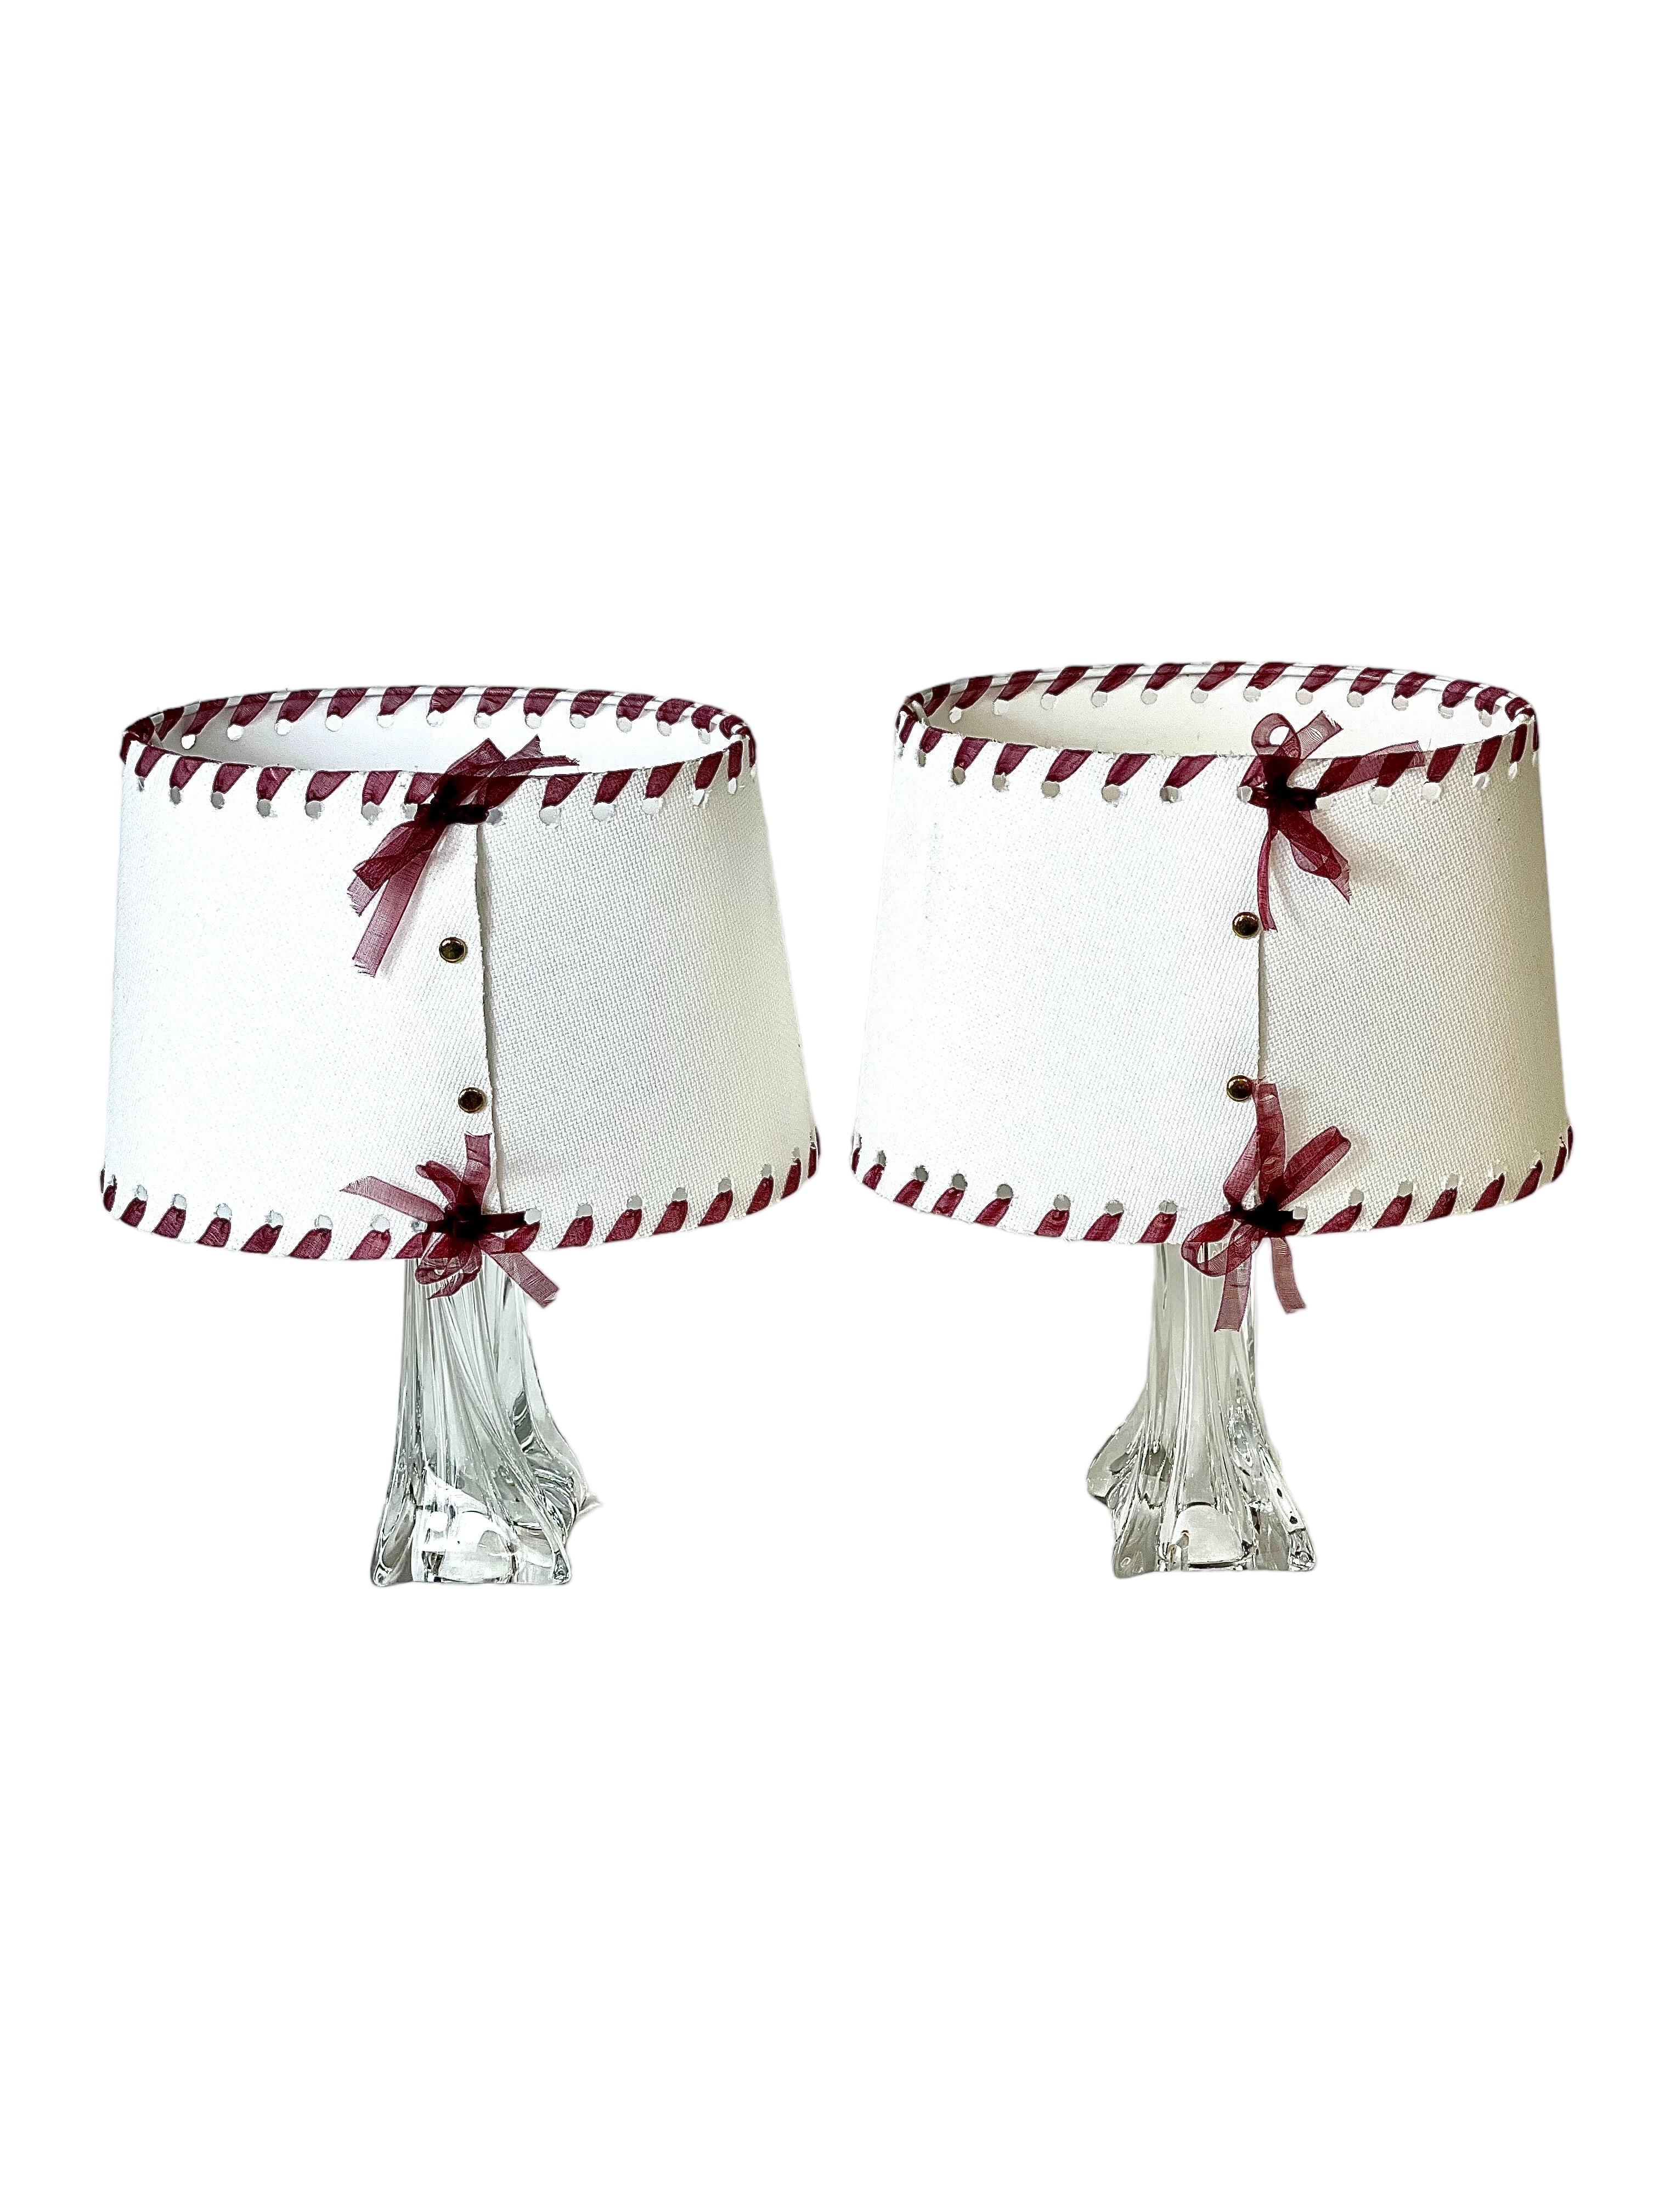 A pair of vintage French Daum crystal table lamps, from the legendary French Daum cristallerie. Their glorious, curved organic shape catches the light beautifully and forms a very stylish and heavy base. The cream canvas shades have a wine-red